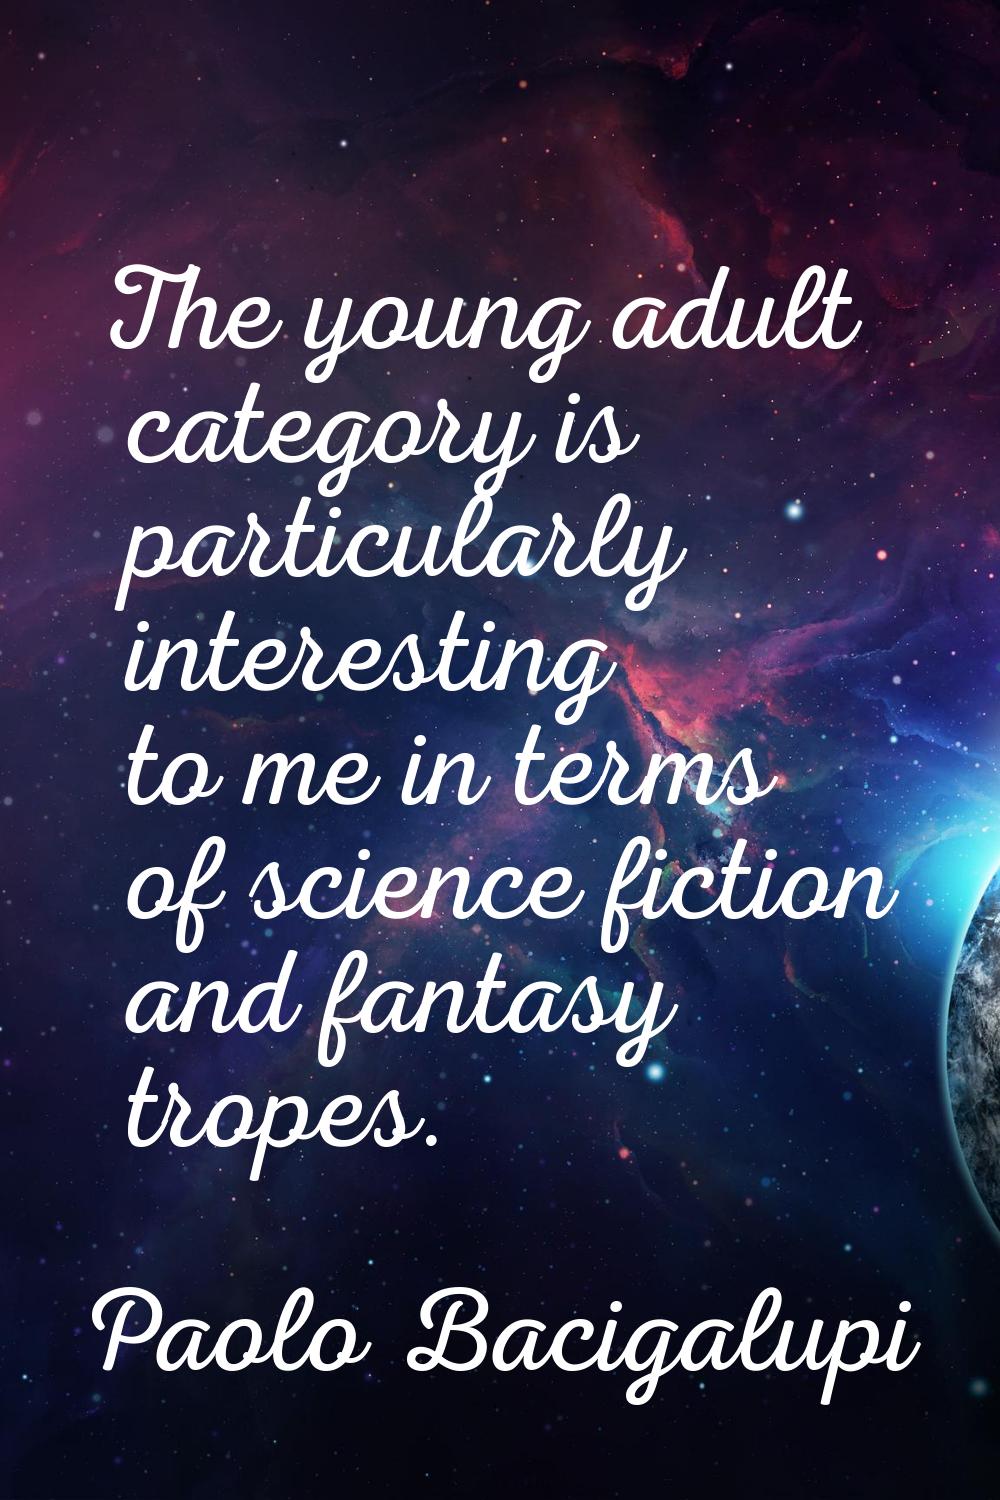 The young adult category is particularly interesting to me in terms of science fiction and fantasy 